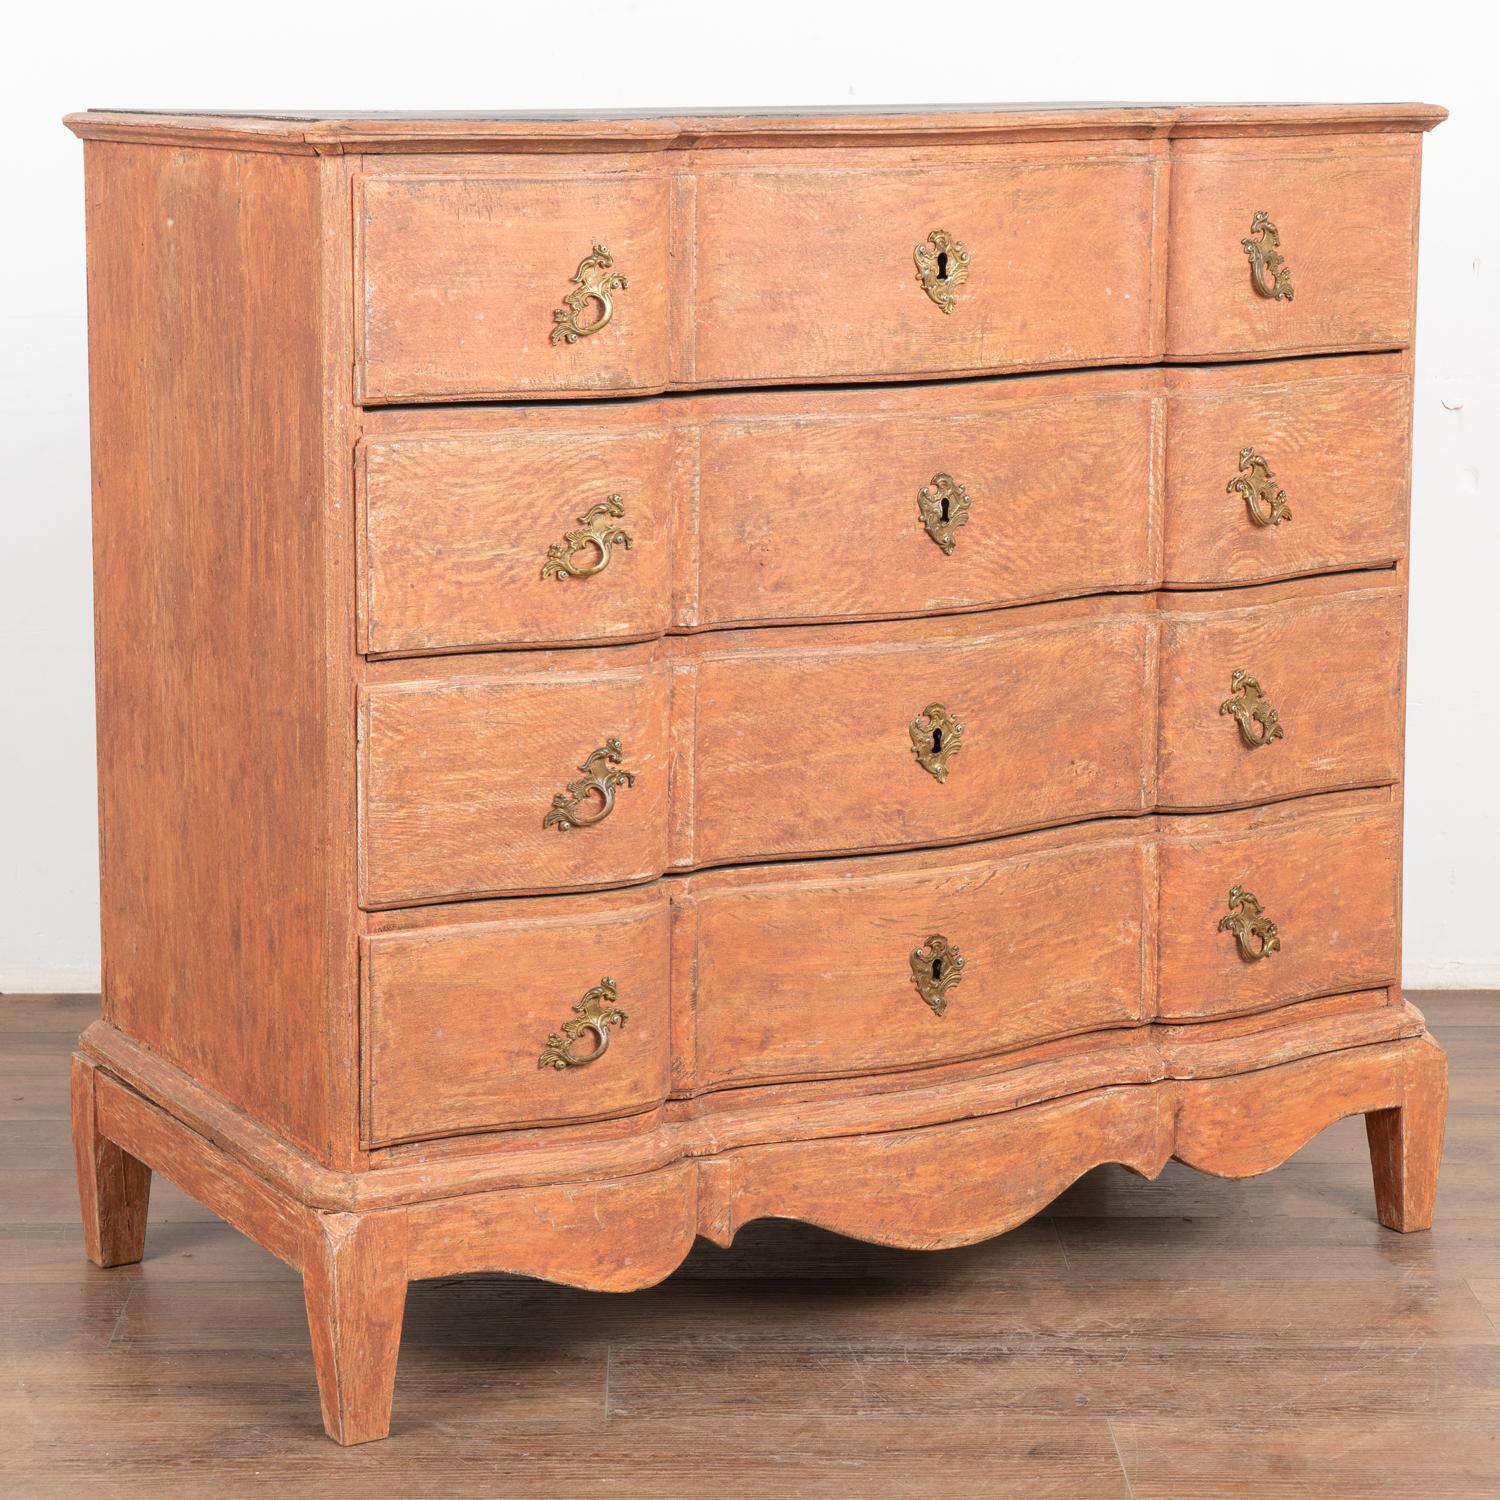 This antique rococo large oak chest of drawers features a serpentine front, brass hardware pulls and is raised on a scalloped skirt base.
The newer, professionally applied and layered salmon painted finish has pink undertones and is gently scraped